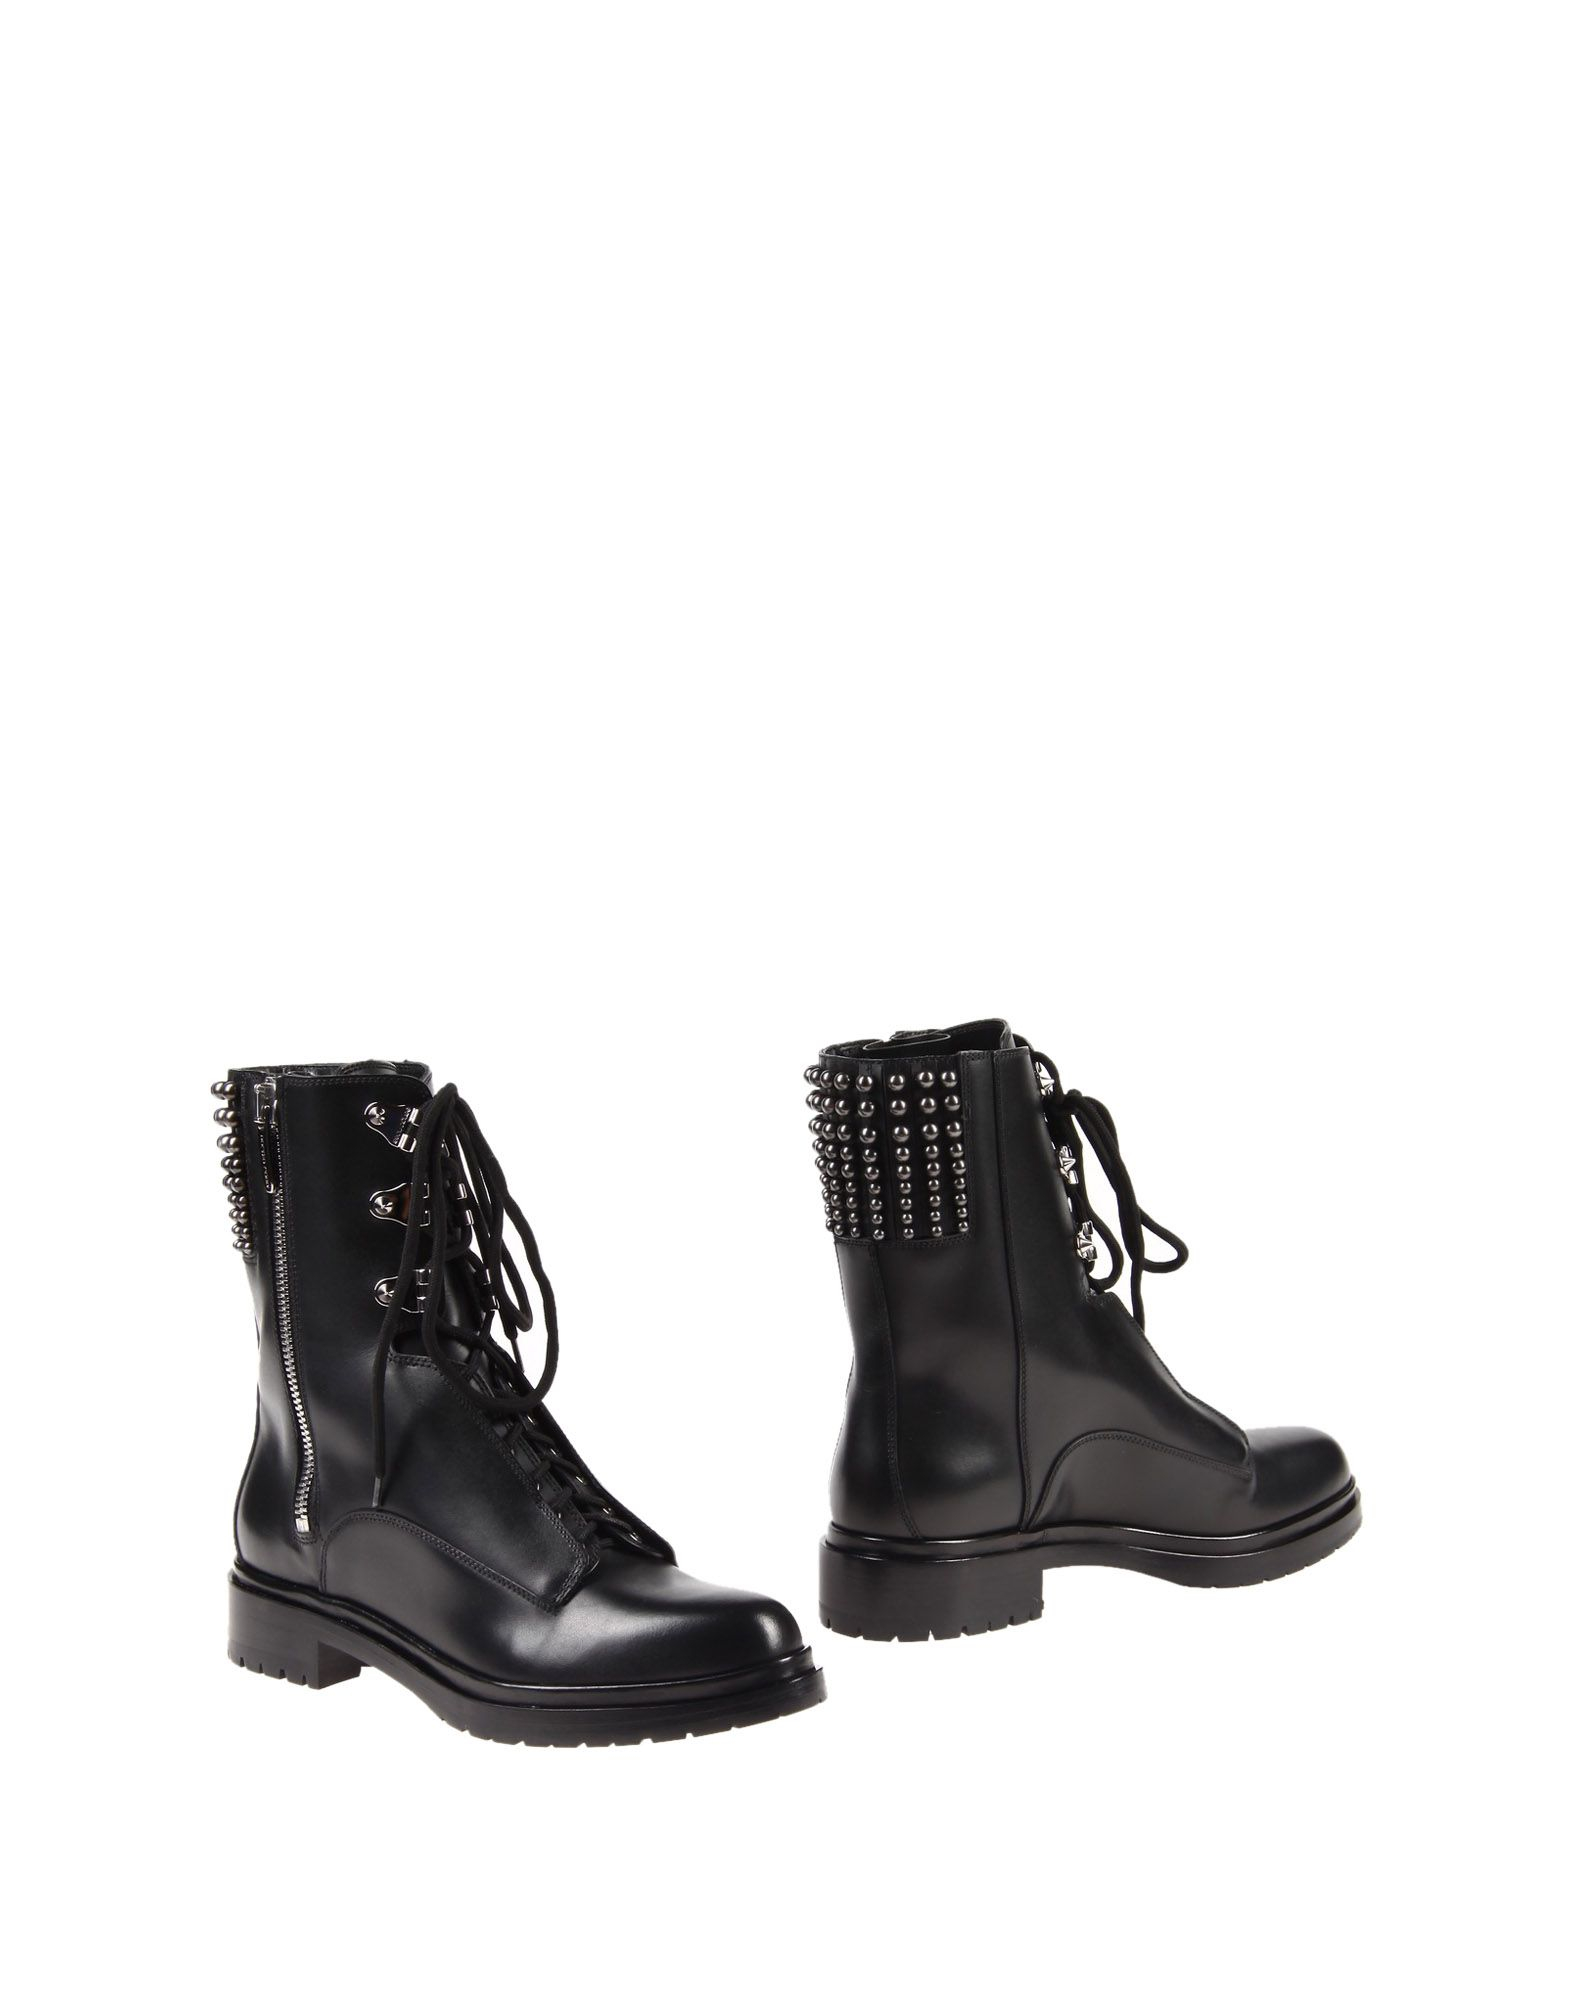 Sergio rossi Ankle Boots in Black | Lyst